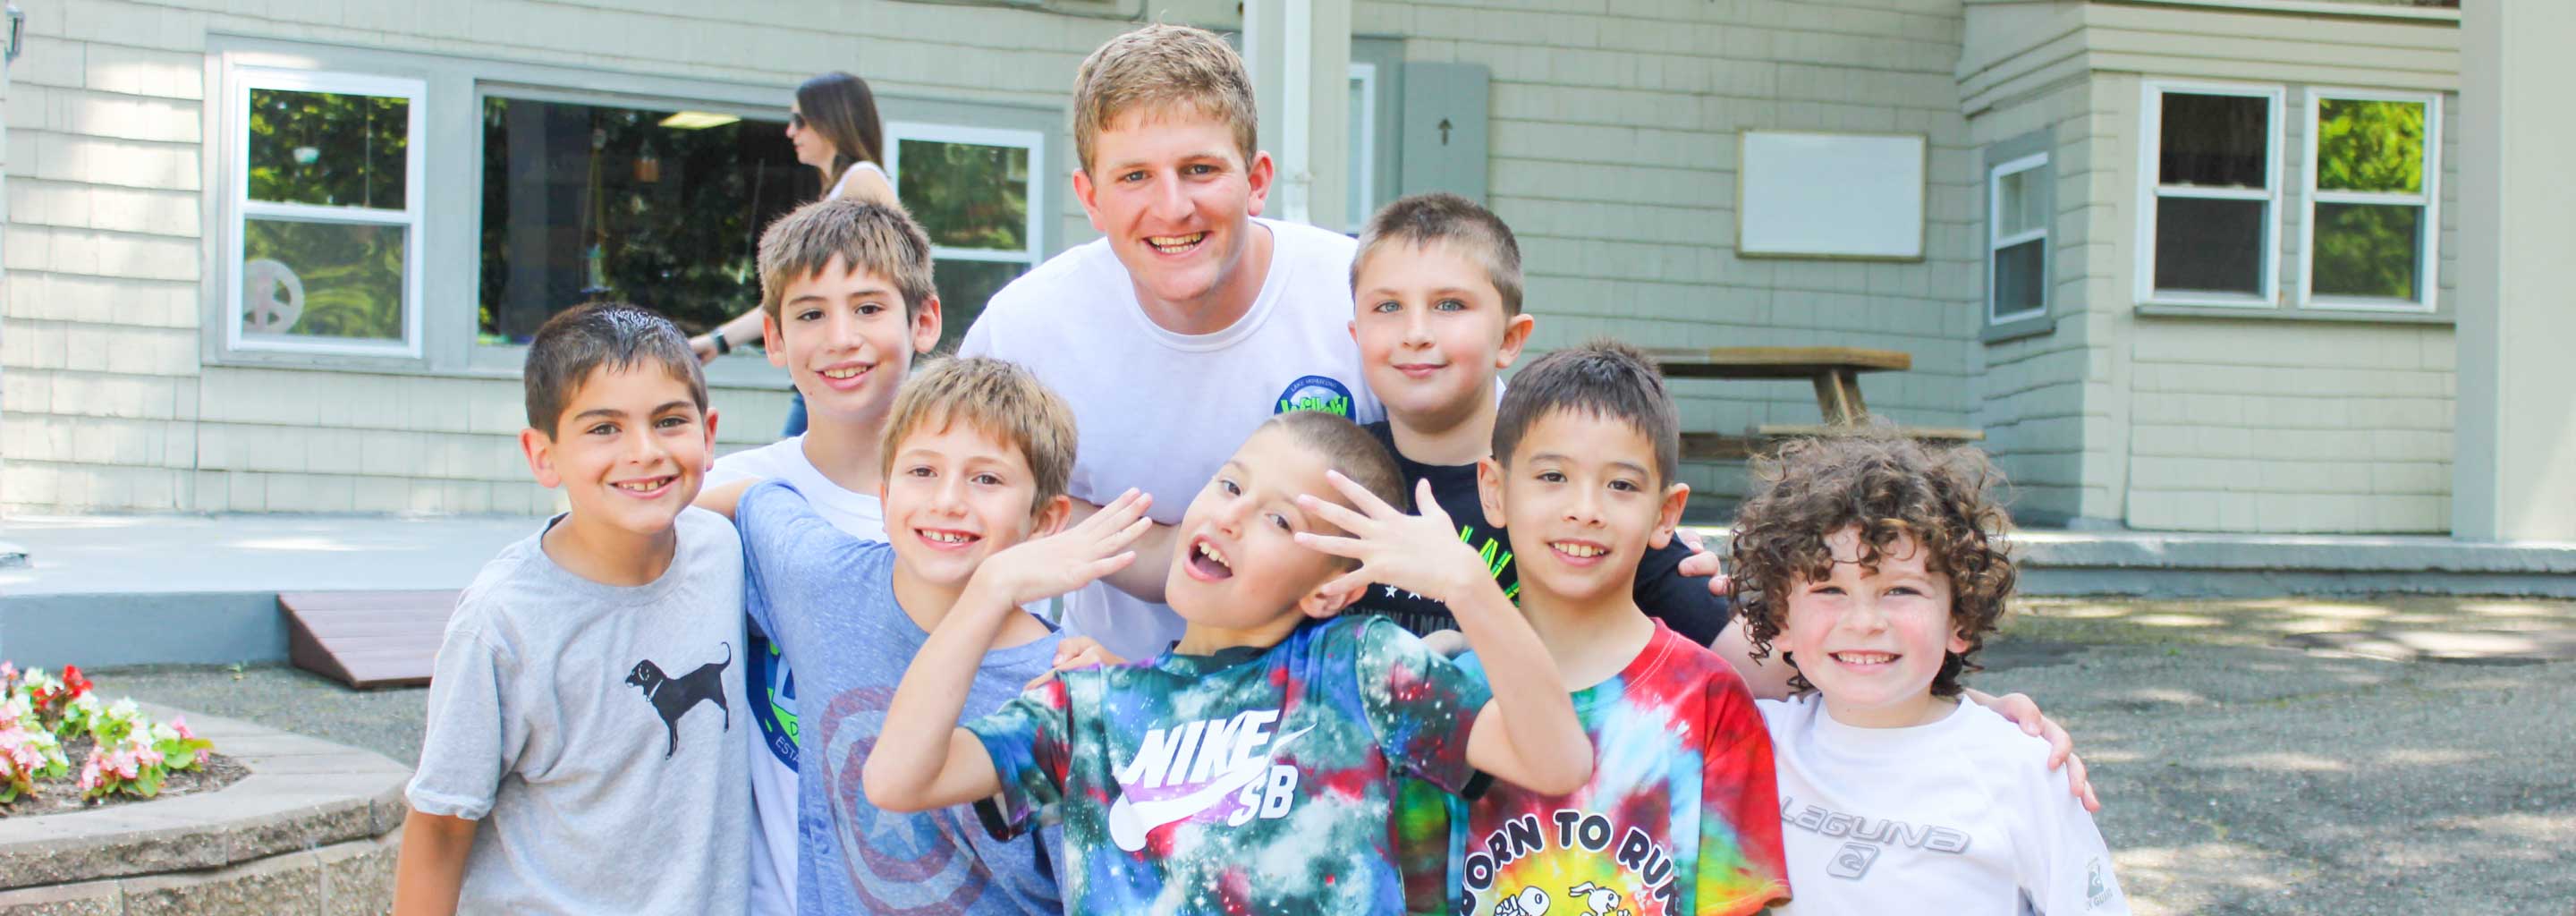 Boys with counselor at day camp